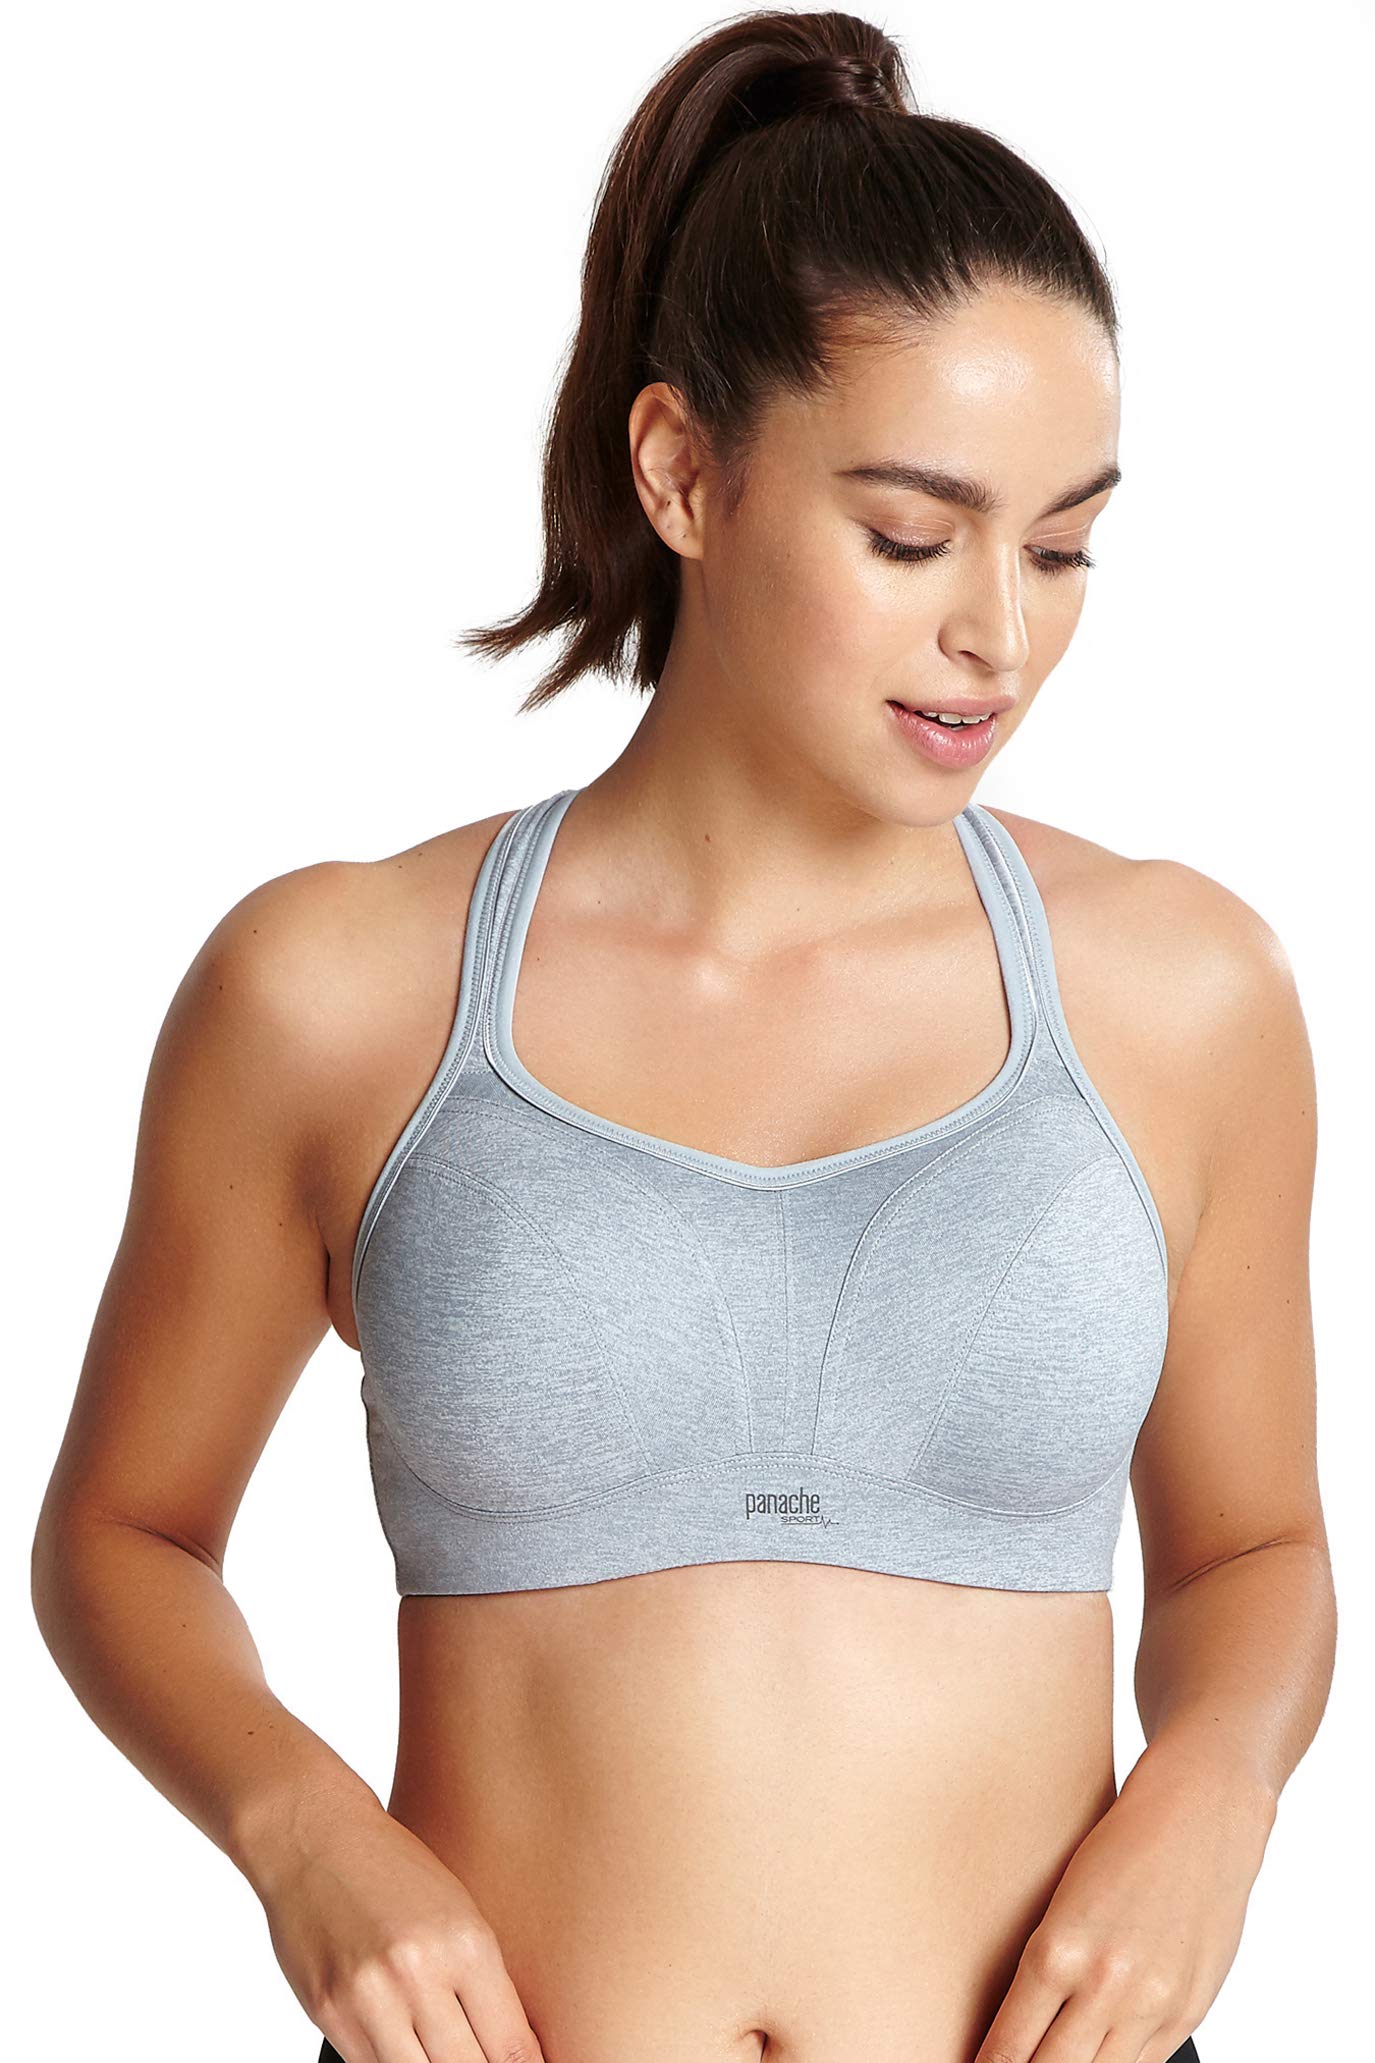 Panache Ultimate High Impact Underwire Sports Bra Clearance Prices